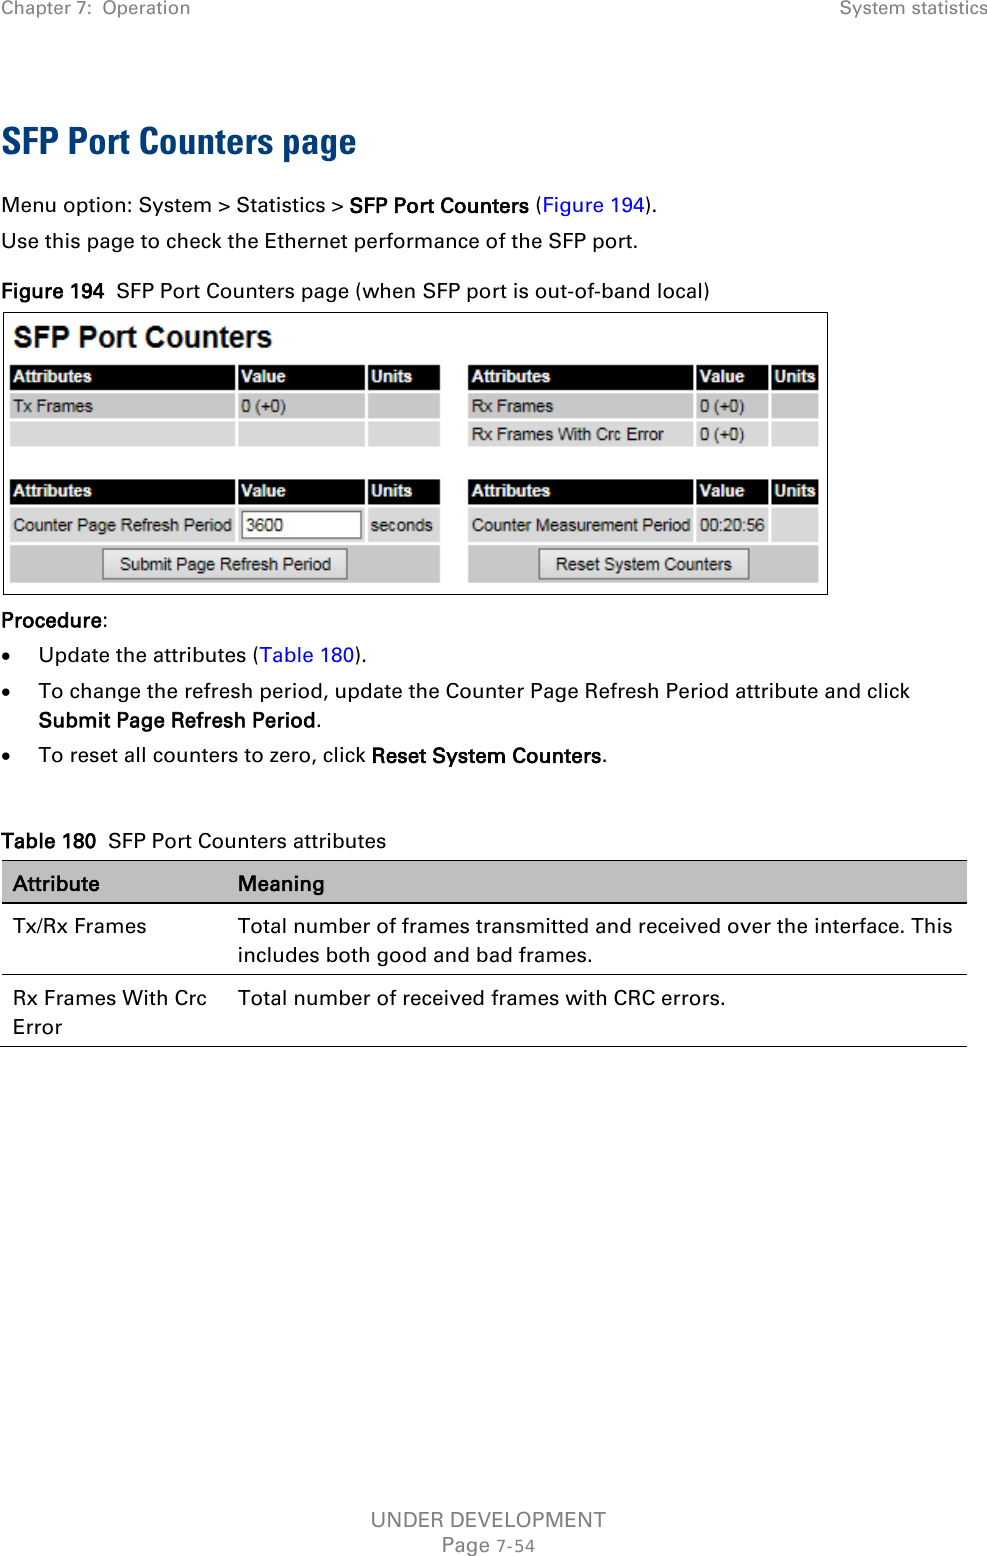 Chapter 7:  Operation System statistics  SFP Port Counters page Menu option: System &gt; Statistics &gt; SFP Port Counters (Figure 194). Use this page to check the Ethernet performance of the SFP port. Figure 194  SFP Port Counters page (when SFP port is out-of-band local)  Procedure: • Update the attributes (Table 180). • To change the refresh period, update the Counter Page Refresh Period attribute and click Submit Page Refresh Period. • To reset all counters to zero, click Reset System Counters.  Table 180  SFP Port Counters attributes Attribute Meaning Tx/Rx Frames  Total number of frames transmitted and received over the interface. This includes both good and bad frames. Rx Frames With Crc Error Total number of received frames with CRC errors.    UNDER DEVELOPMENT Page 7-54 